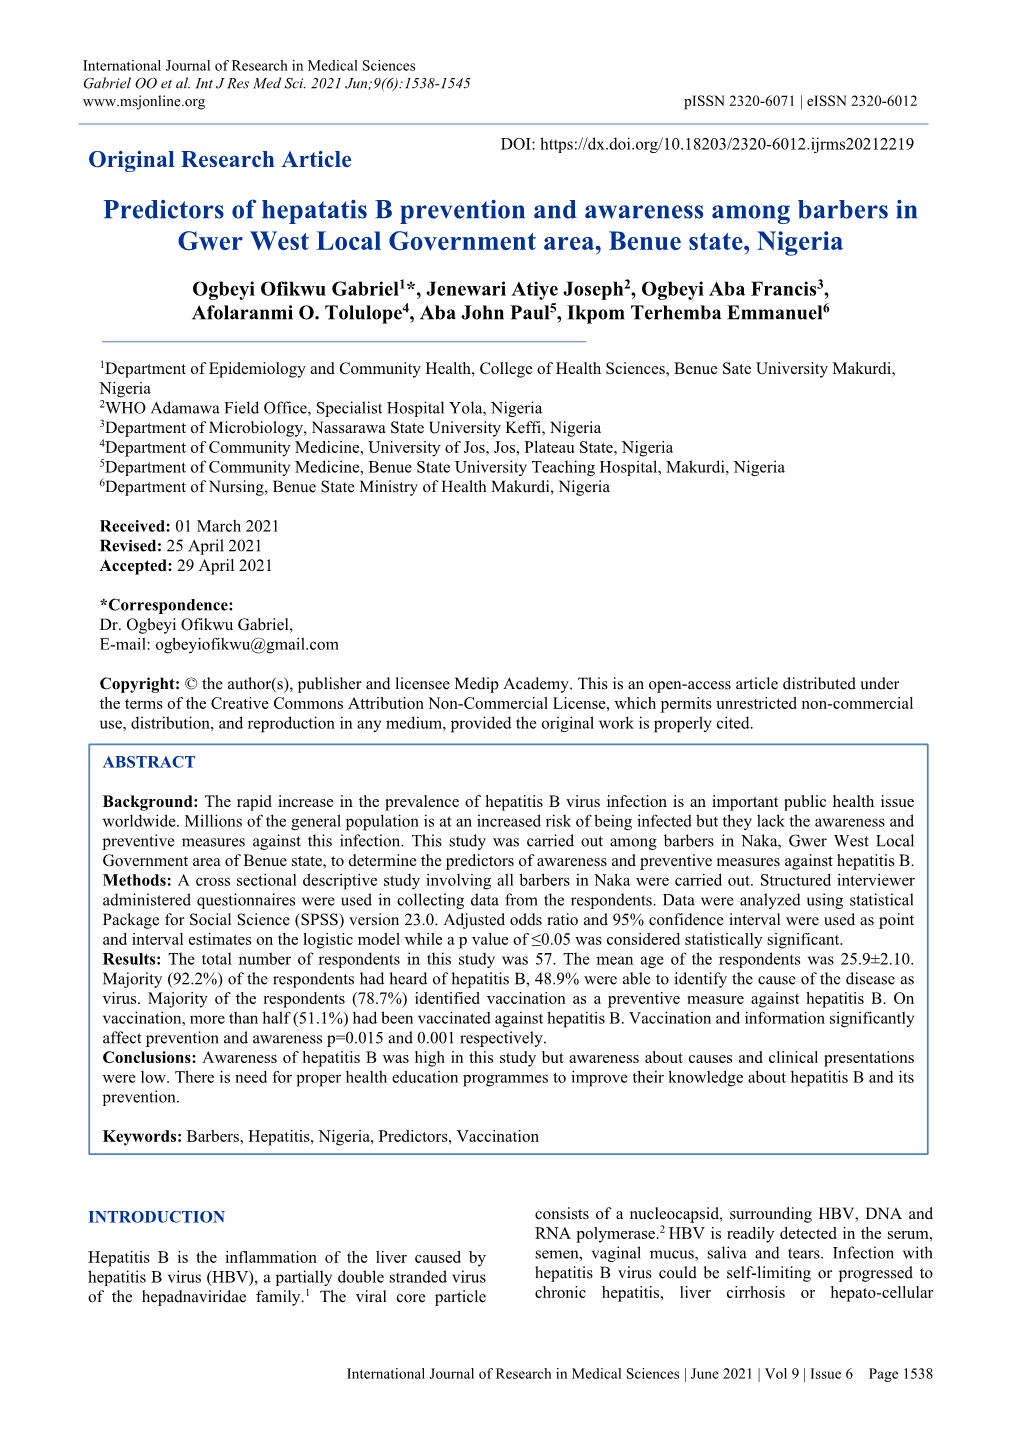 Predictors of Hepatatis B Prevention and Awareness Among Barbers in Gwer West Local Government Area, Benue State, Nigeria